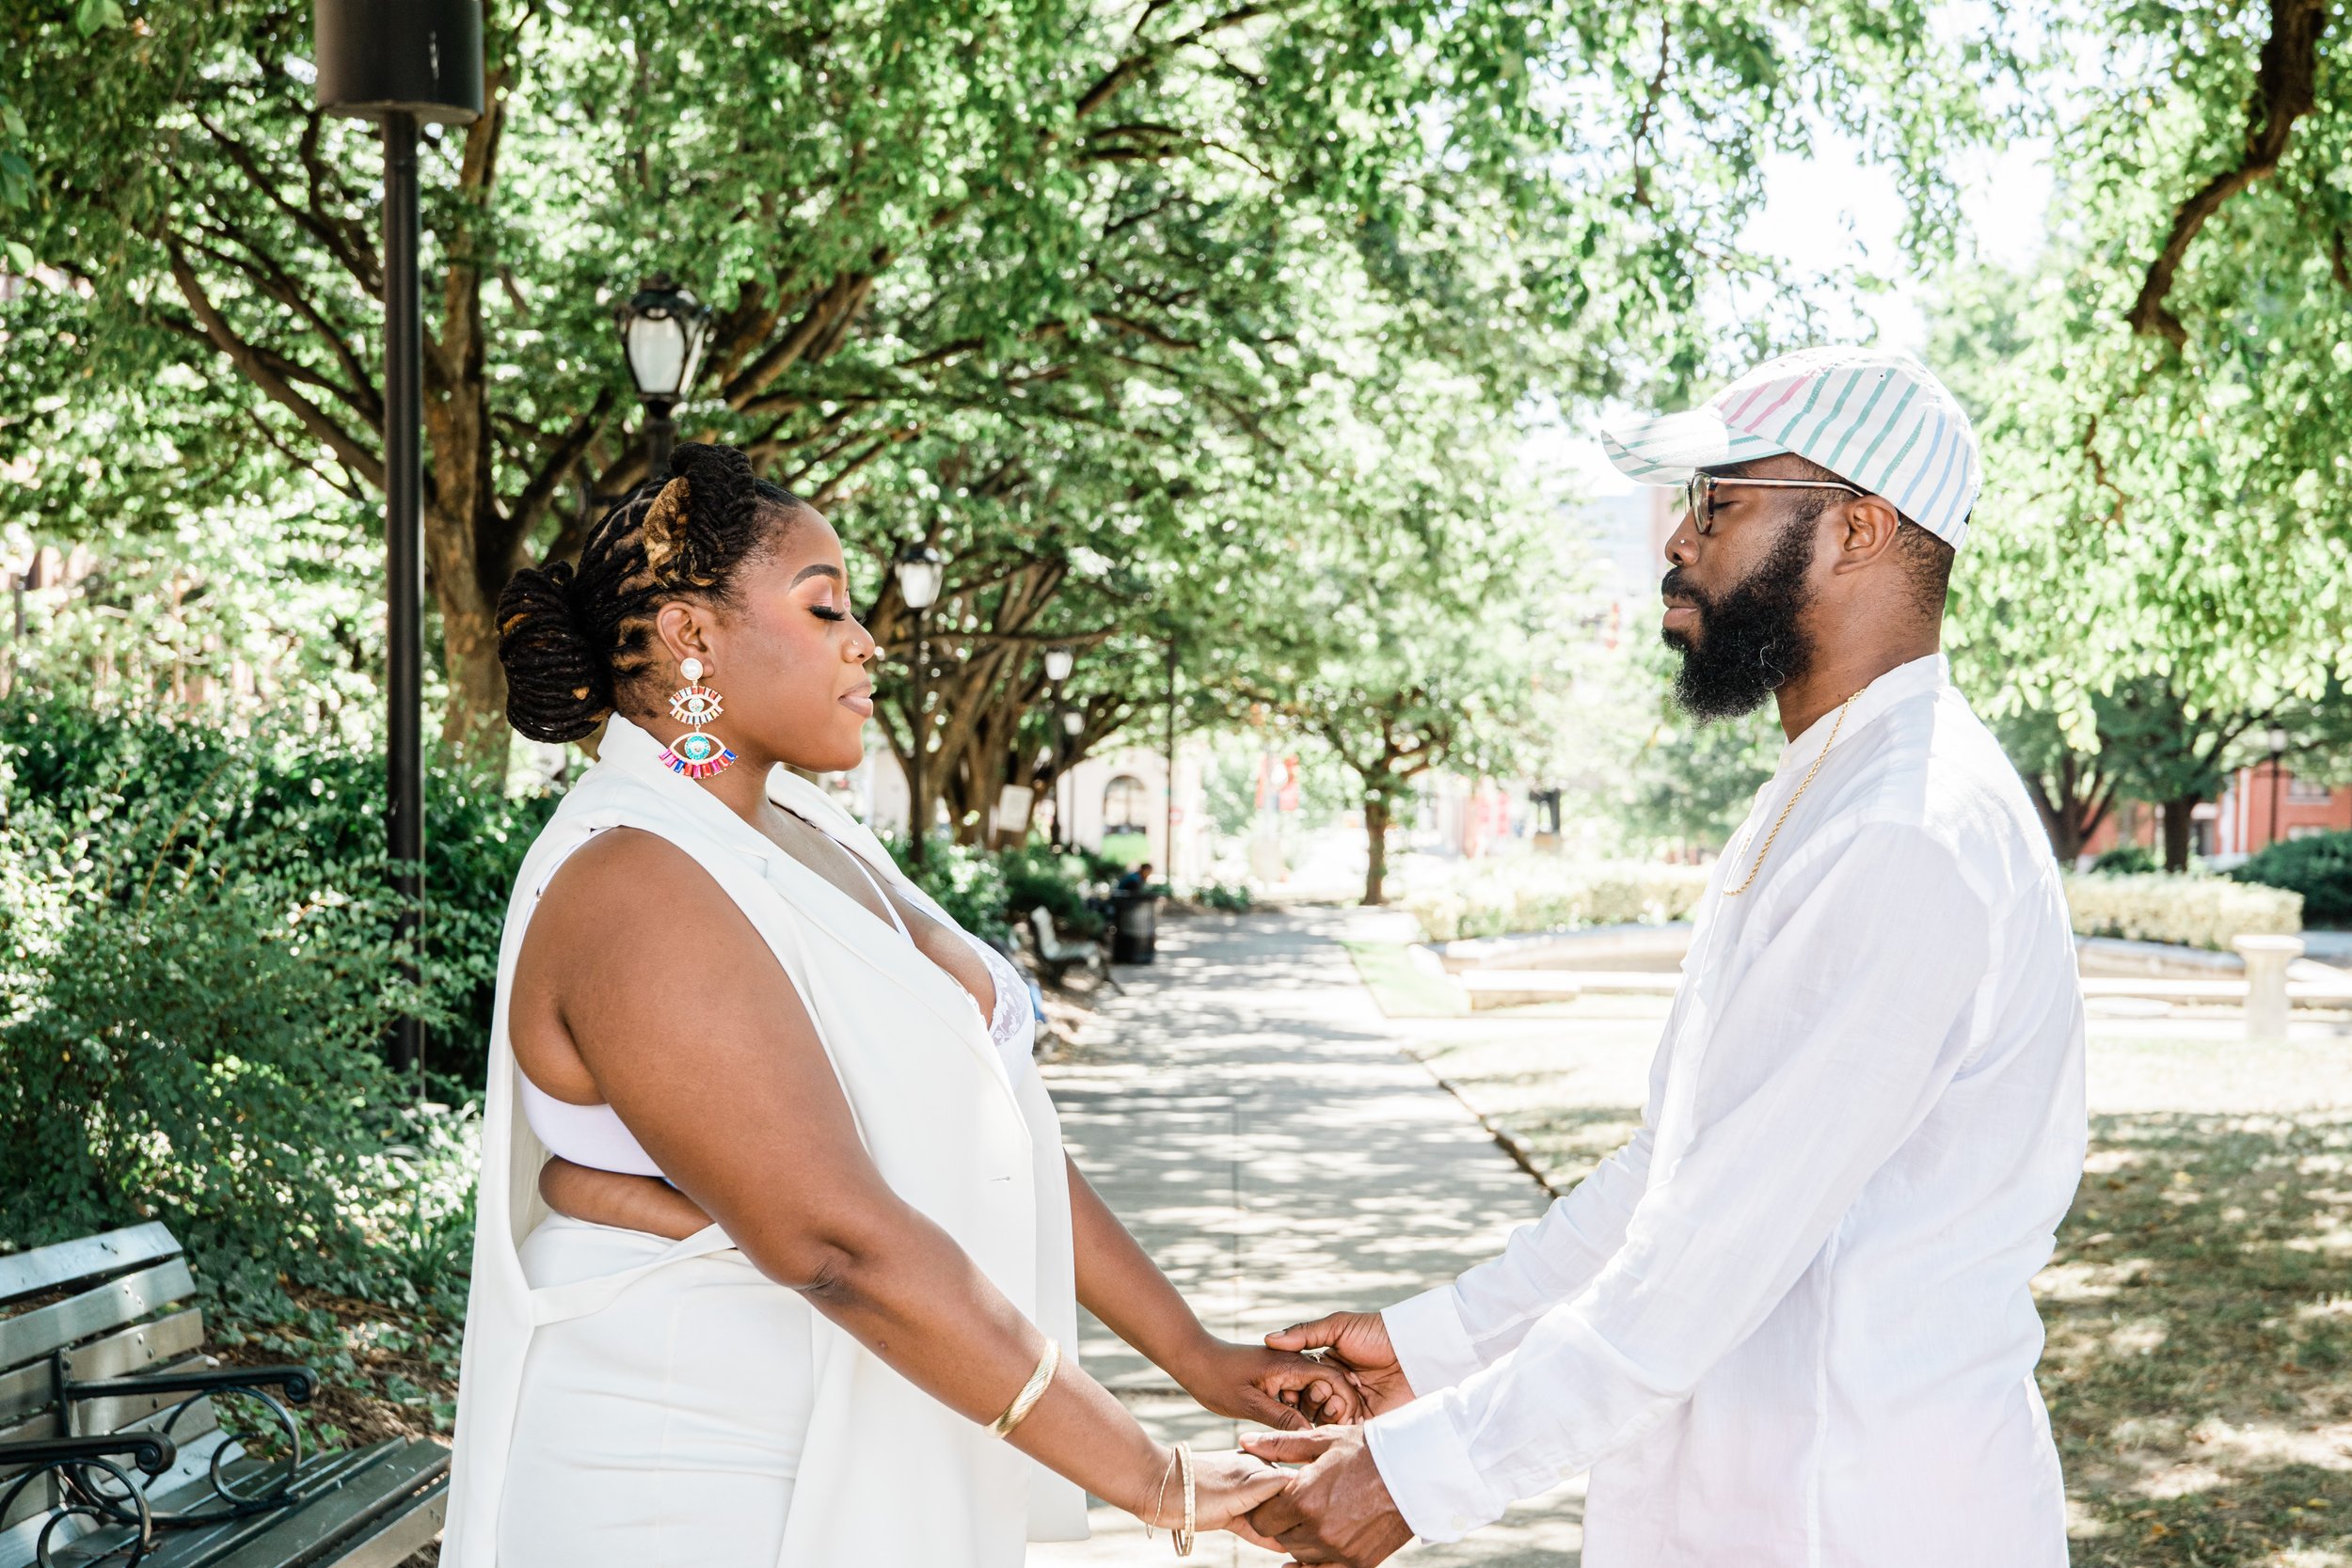 Mount Vernon Engagement Session with Baltimore Power Couple shot by Megapixels Media Photography-1.jpg